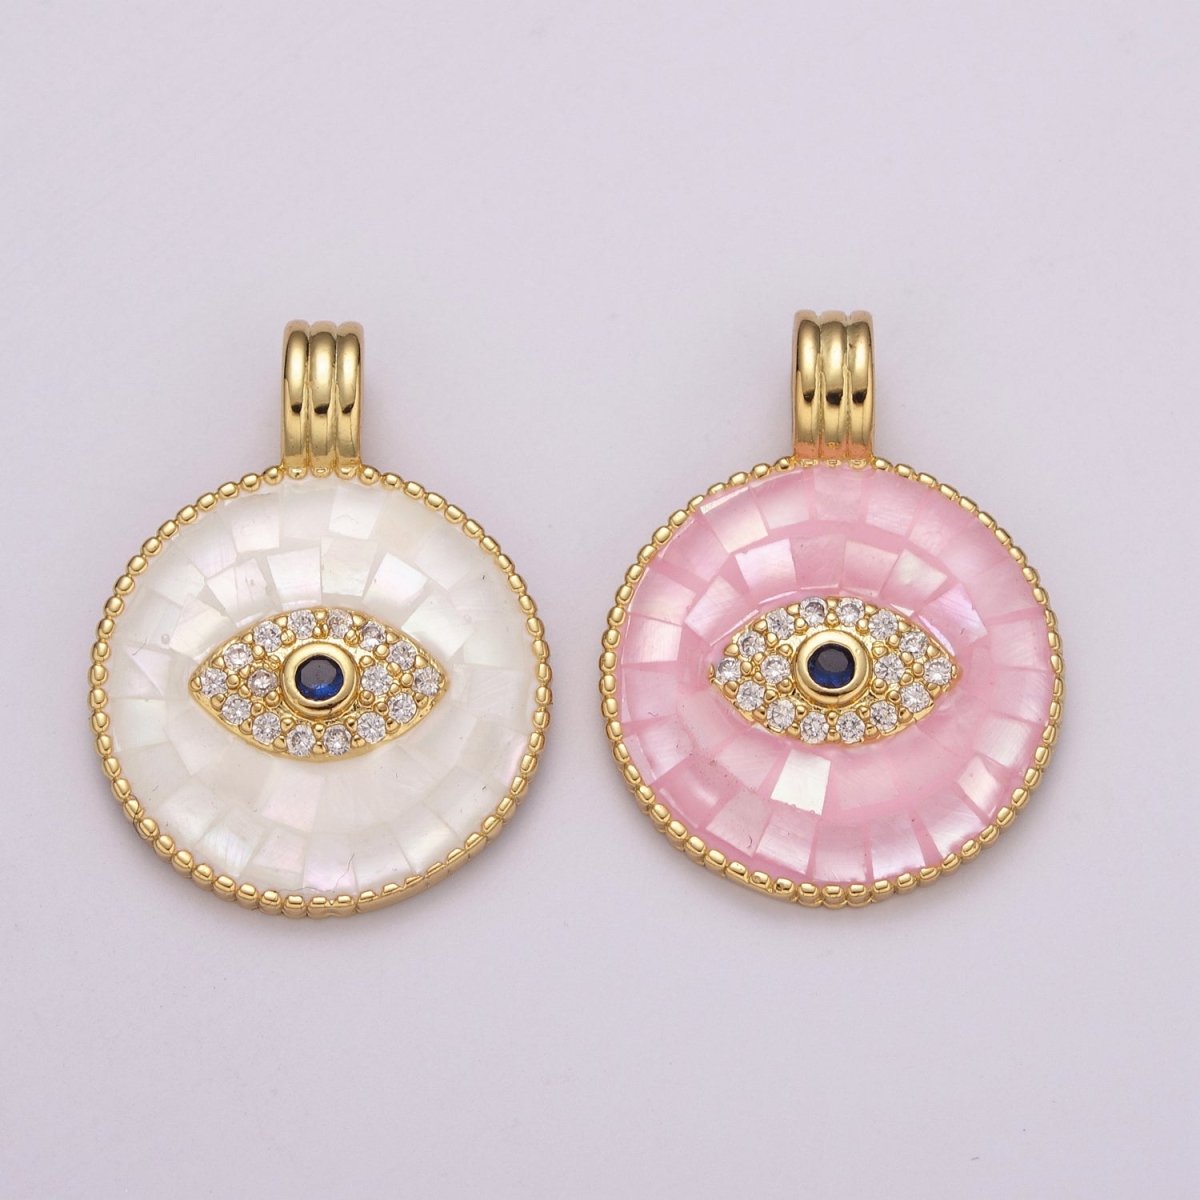 24K Gold Filled Evil Eye Charm Necklace -Round Circle Evil Eye Pendant Necklace - Dainty Pink White Necklace Evil Eye Charm - Layered Necklace for Women N-1481 N-1482 - DLUXCA